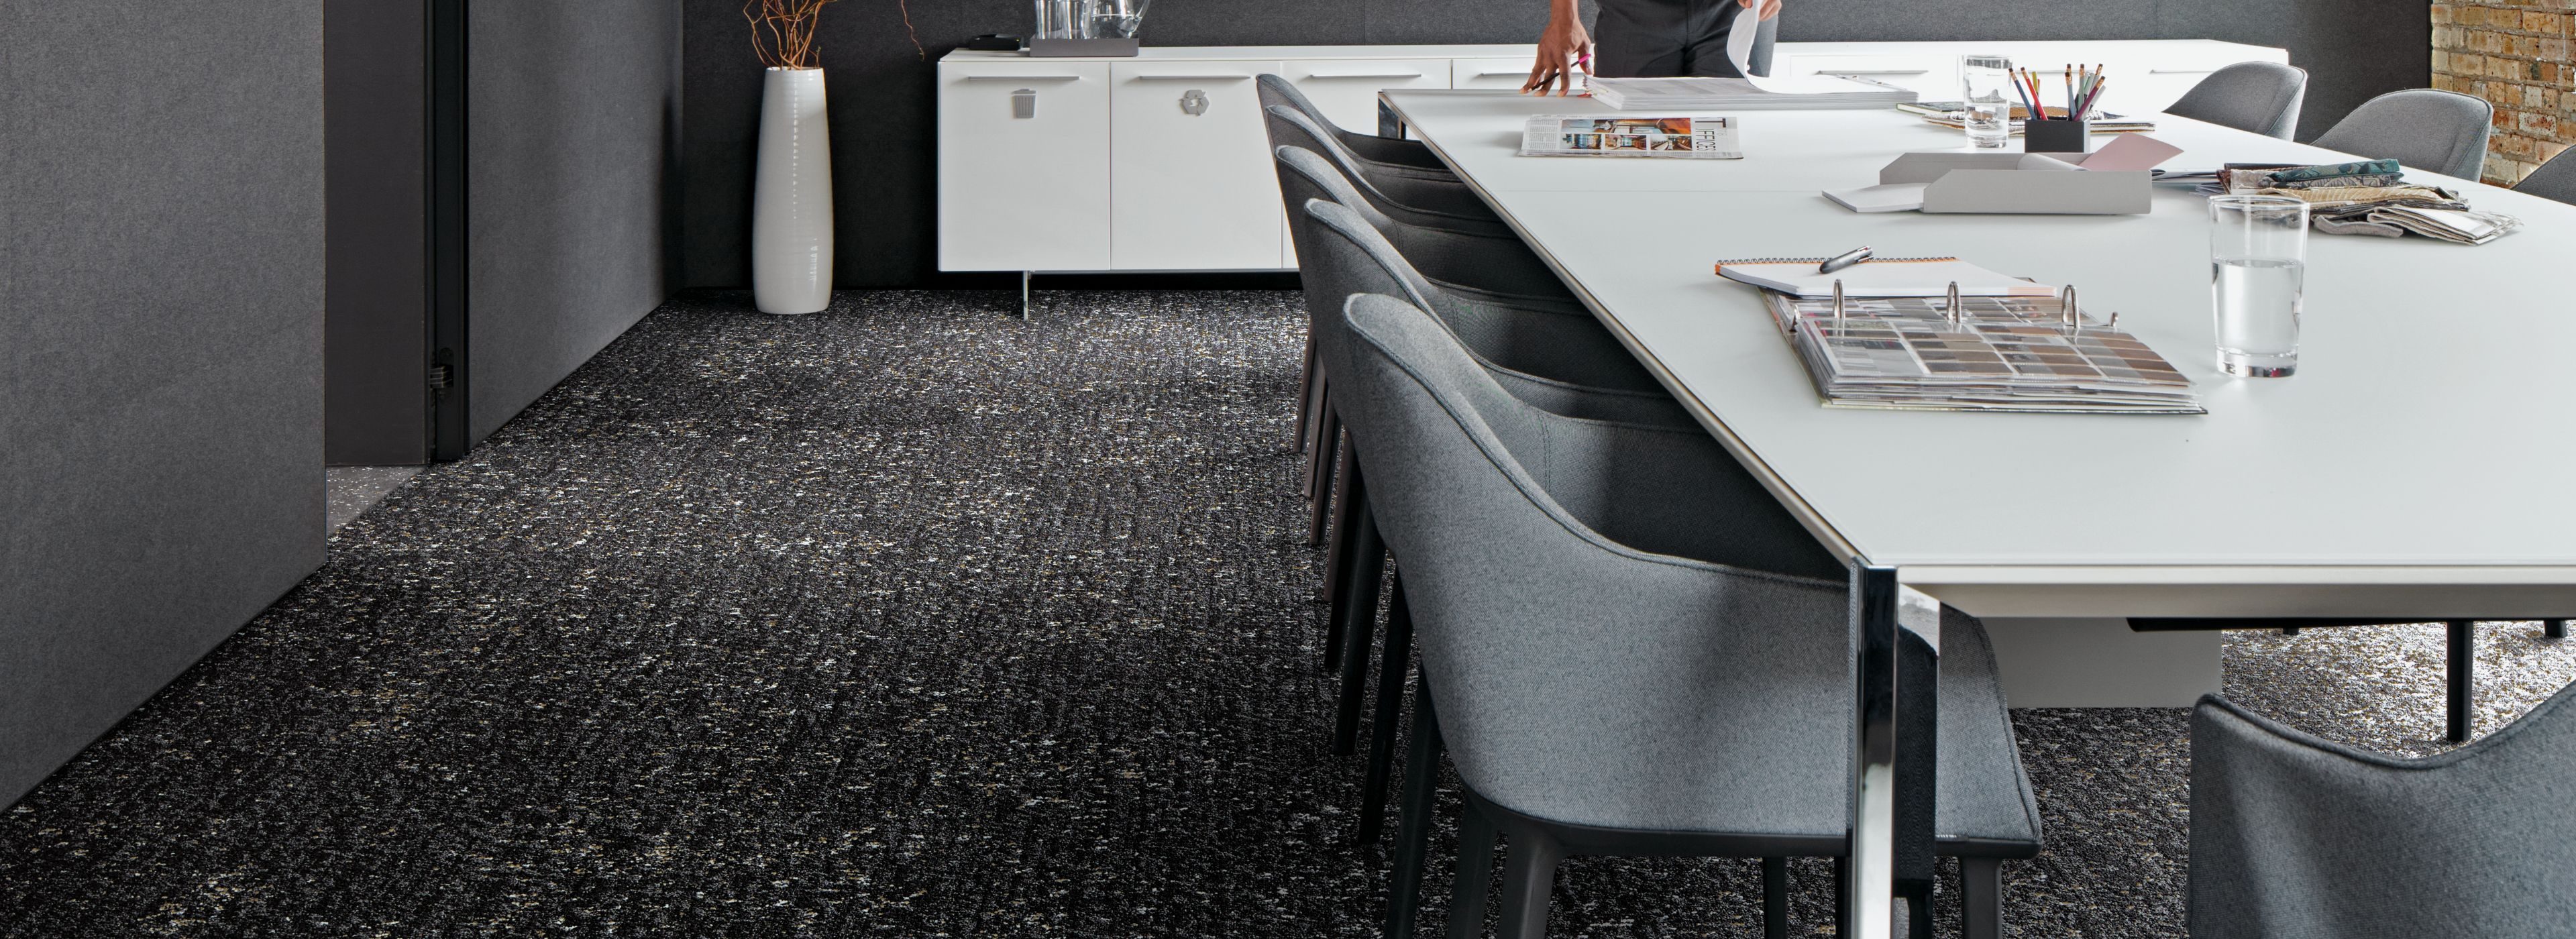 Interface Step in Time and Walk the Aisle carpet tile in meeting area with table and chairs número de imagen 1